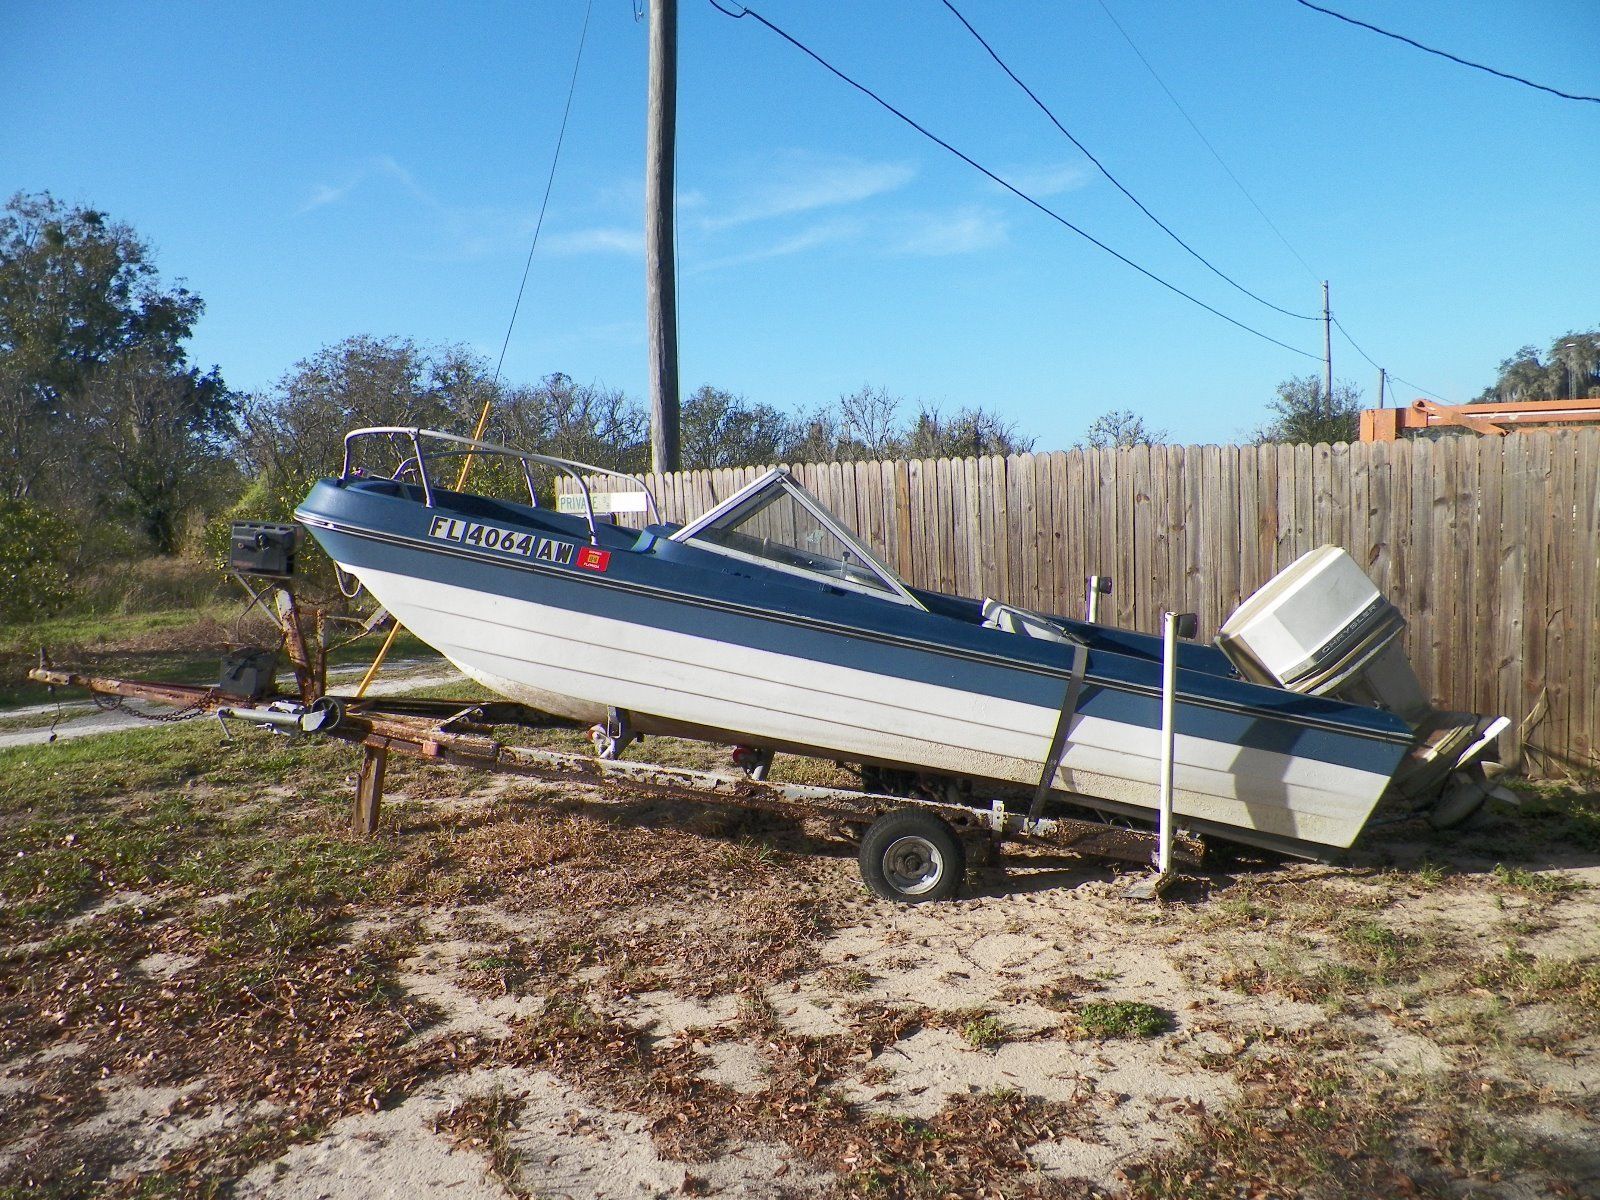 Seabreeze 1550 1971 for sale for $560 - Boats-from-USA.com